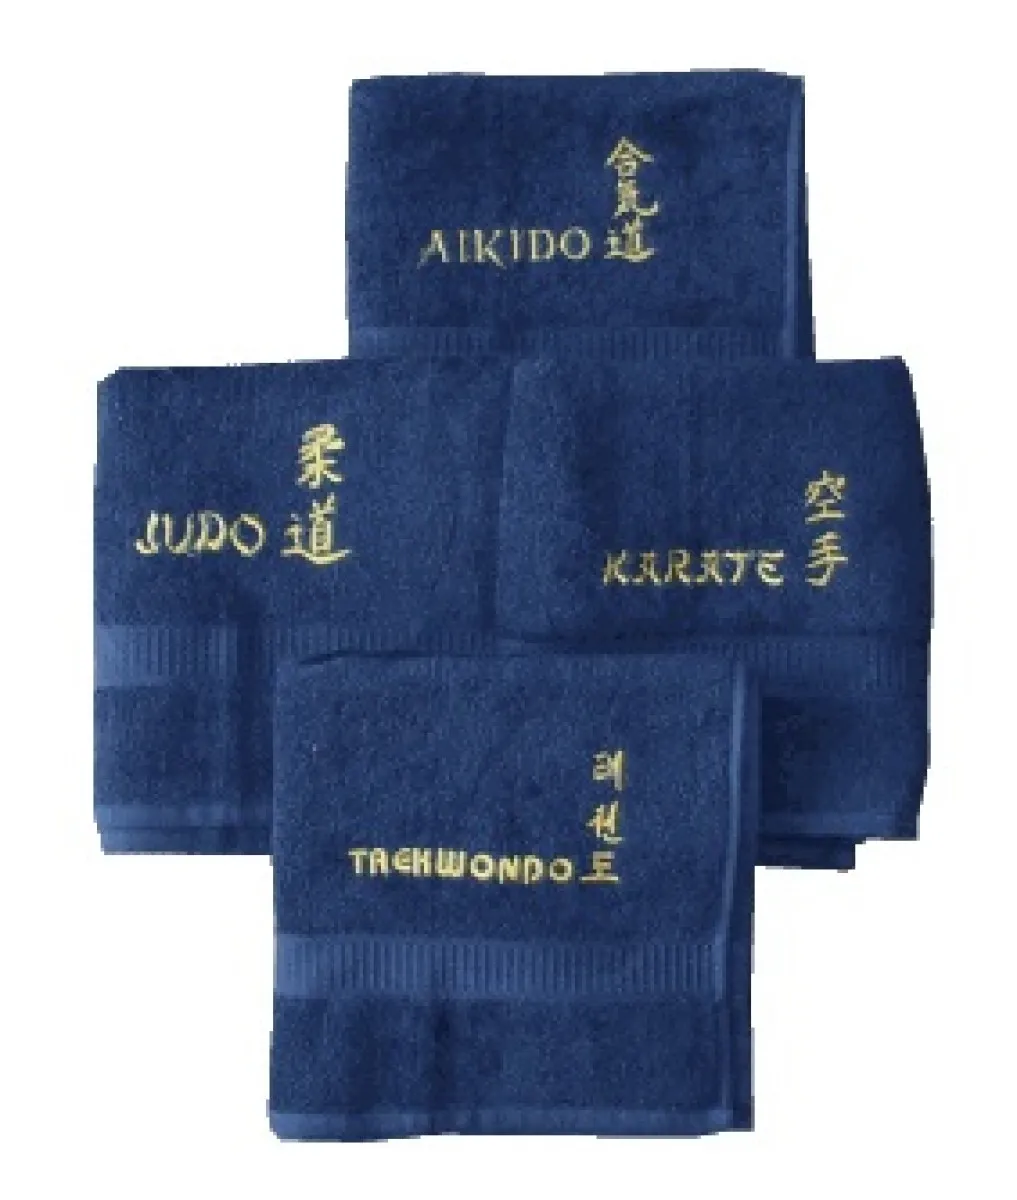 Terry cloth dark blue embroidered with karate in gold